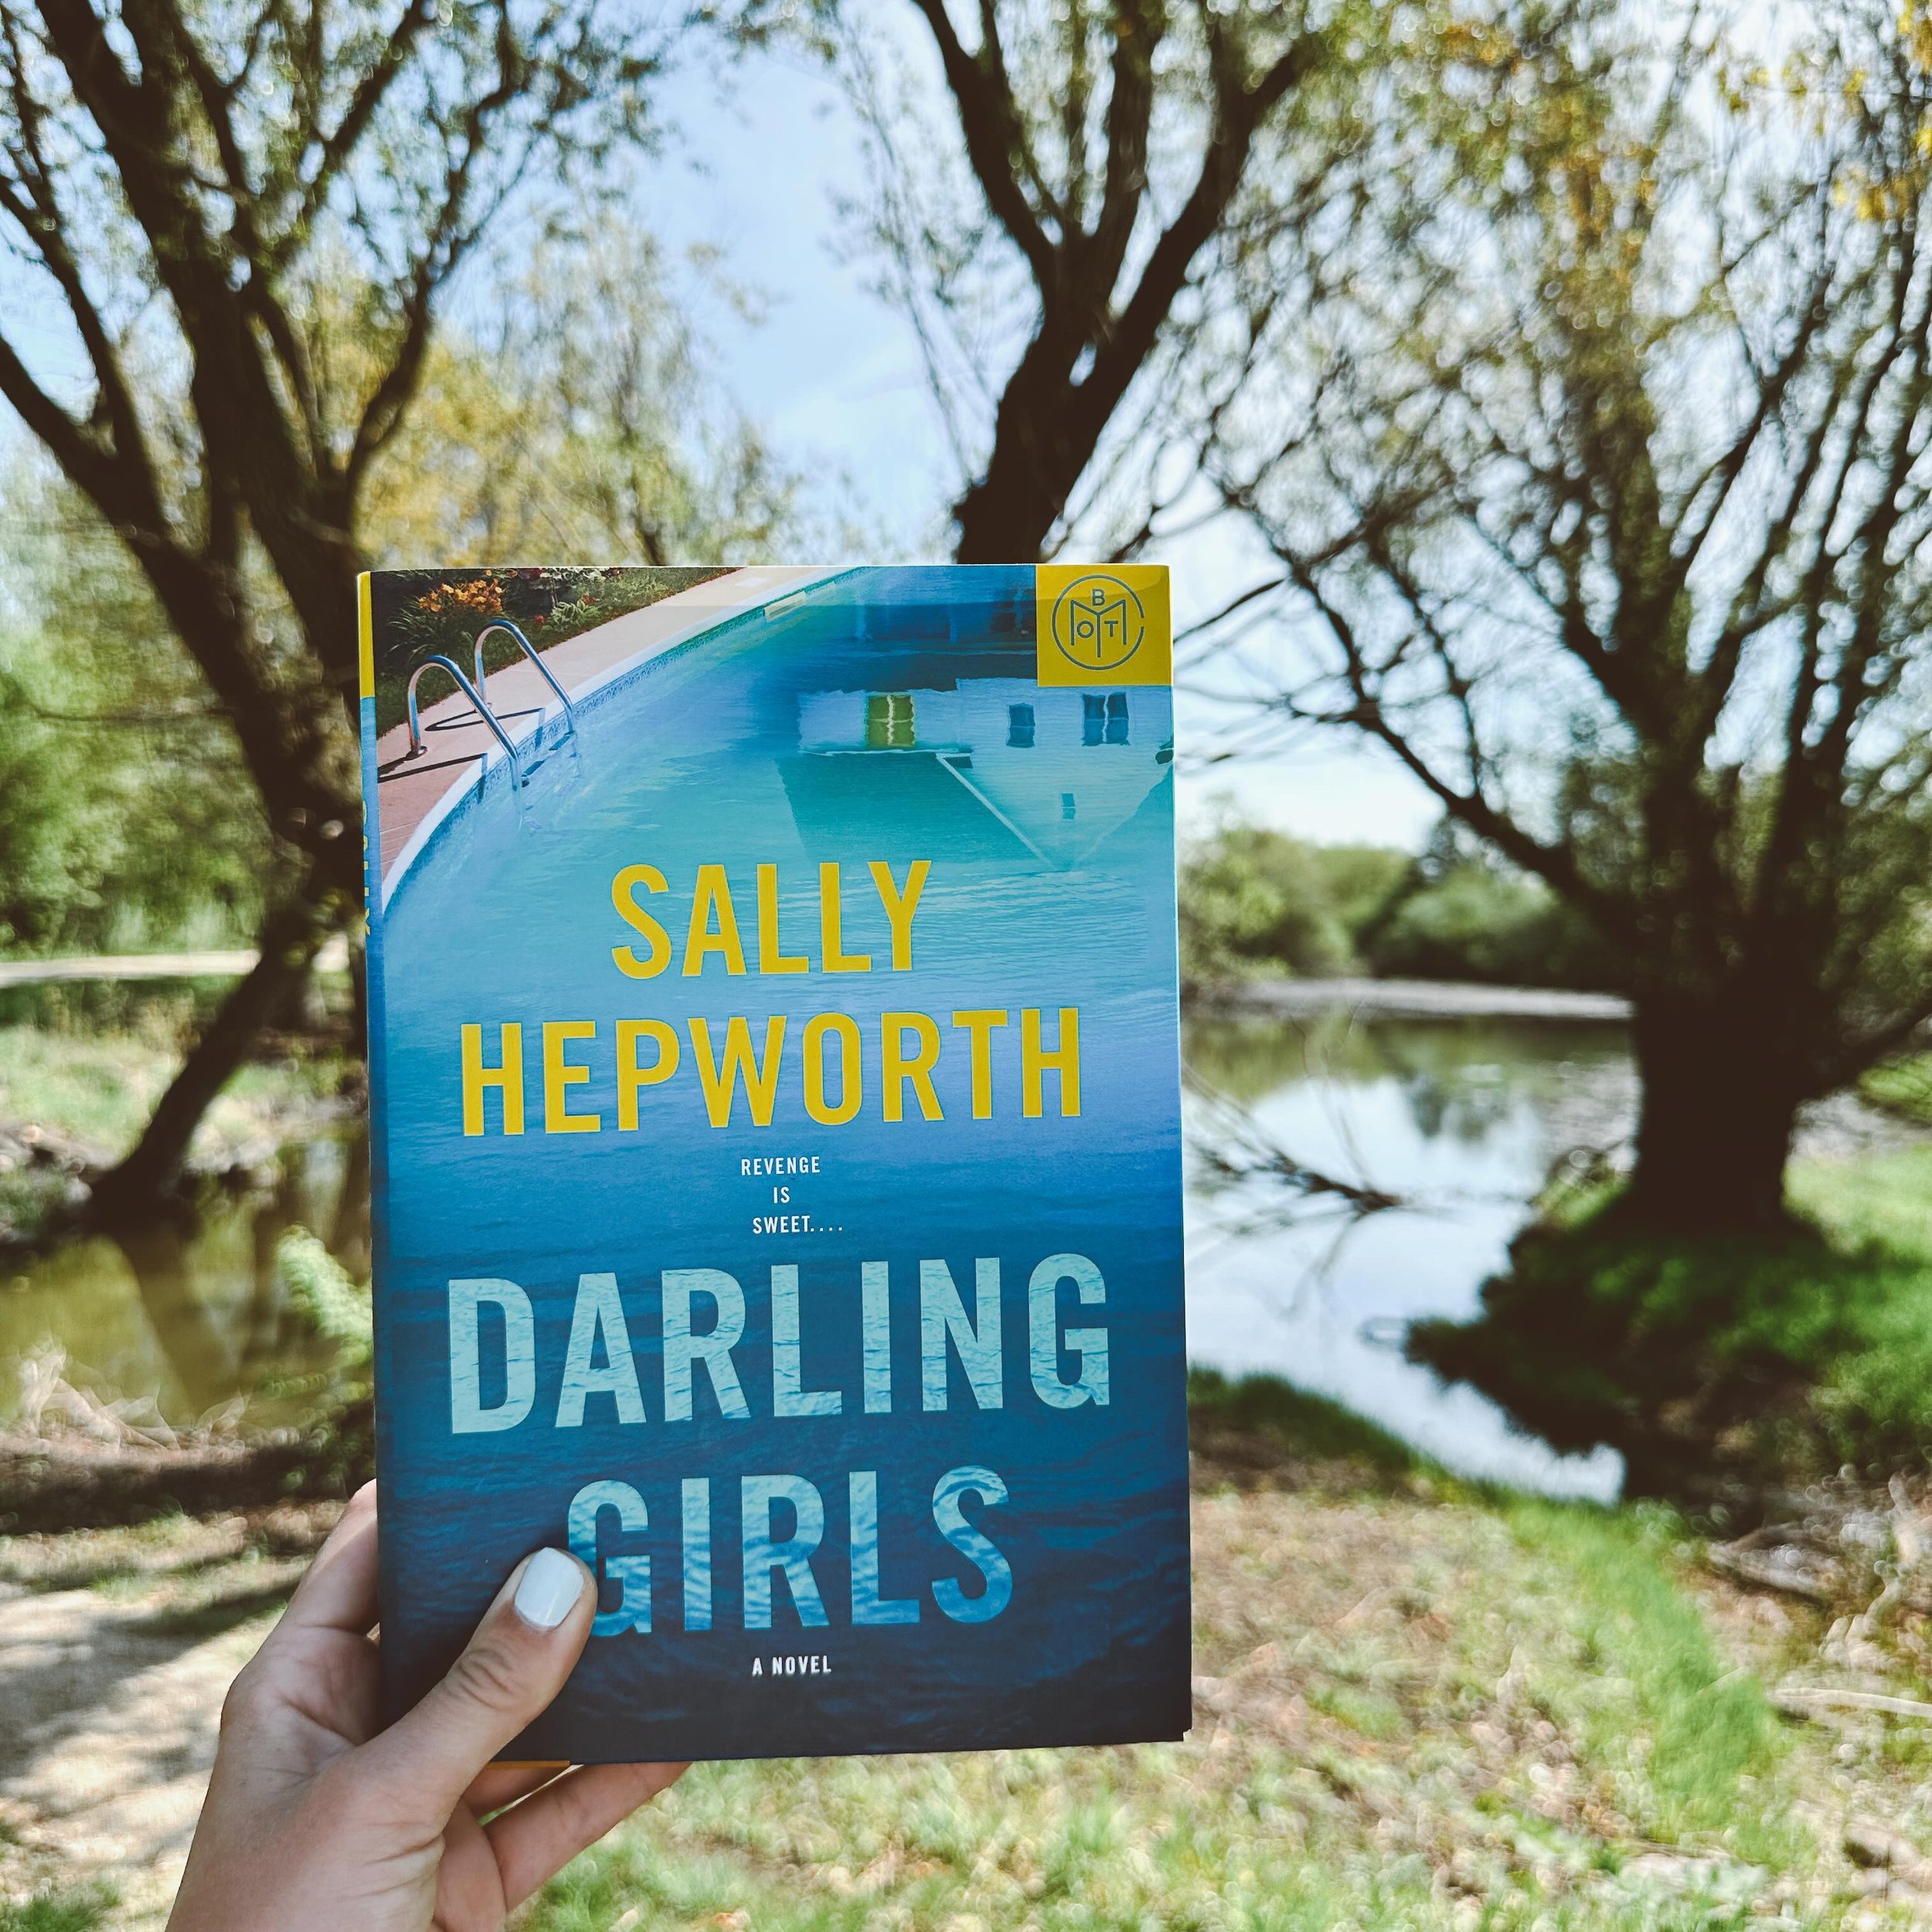 ⭐️⭐️⭐️⭐️(4/5, Thriller)
TL;DR: thriller lovers will enjoy this, was too dark for me at times but was very hard to put down. 
〰️〰️〰️〰️〰️〰️〰️〰️〰️〰️〰️〰️
I could not put this book down! I can&rsquo;t remember the last time I flew through a thriller like 